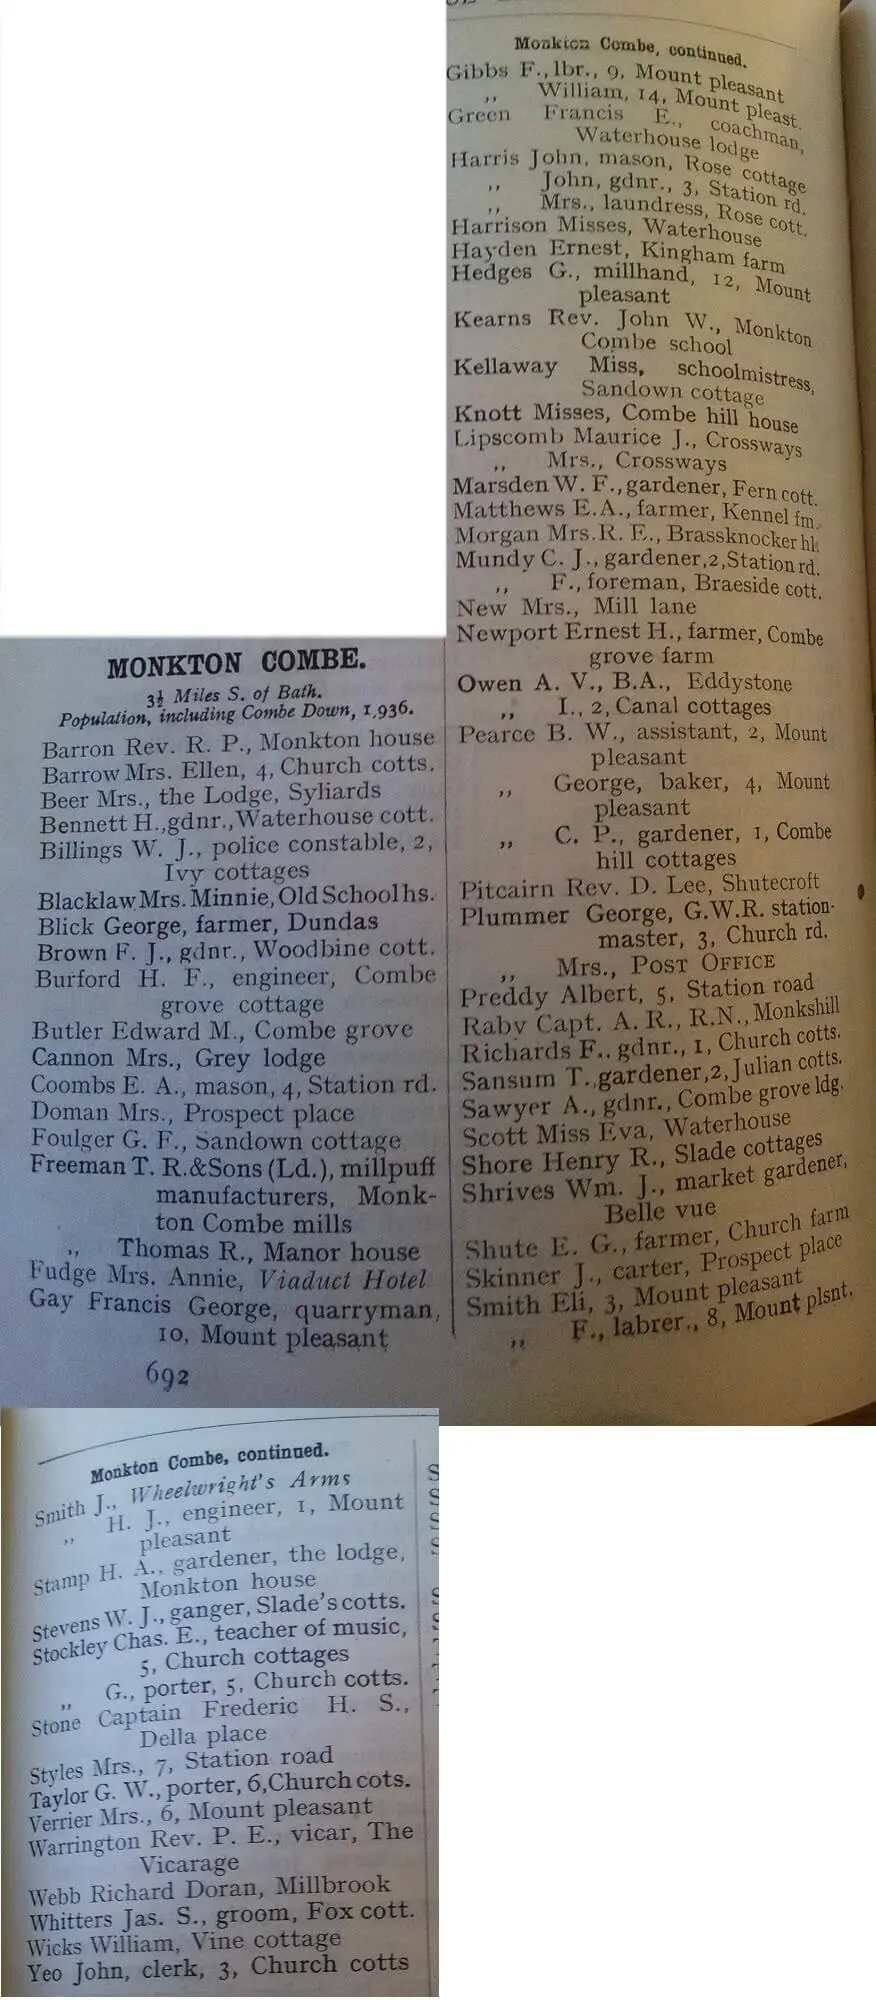 1920 post office directory for monkton combe